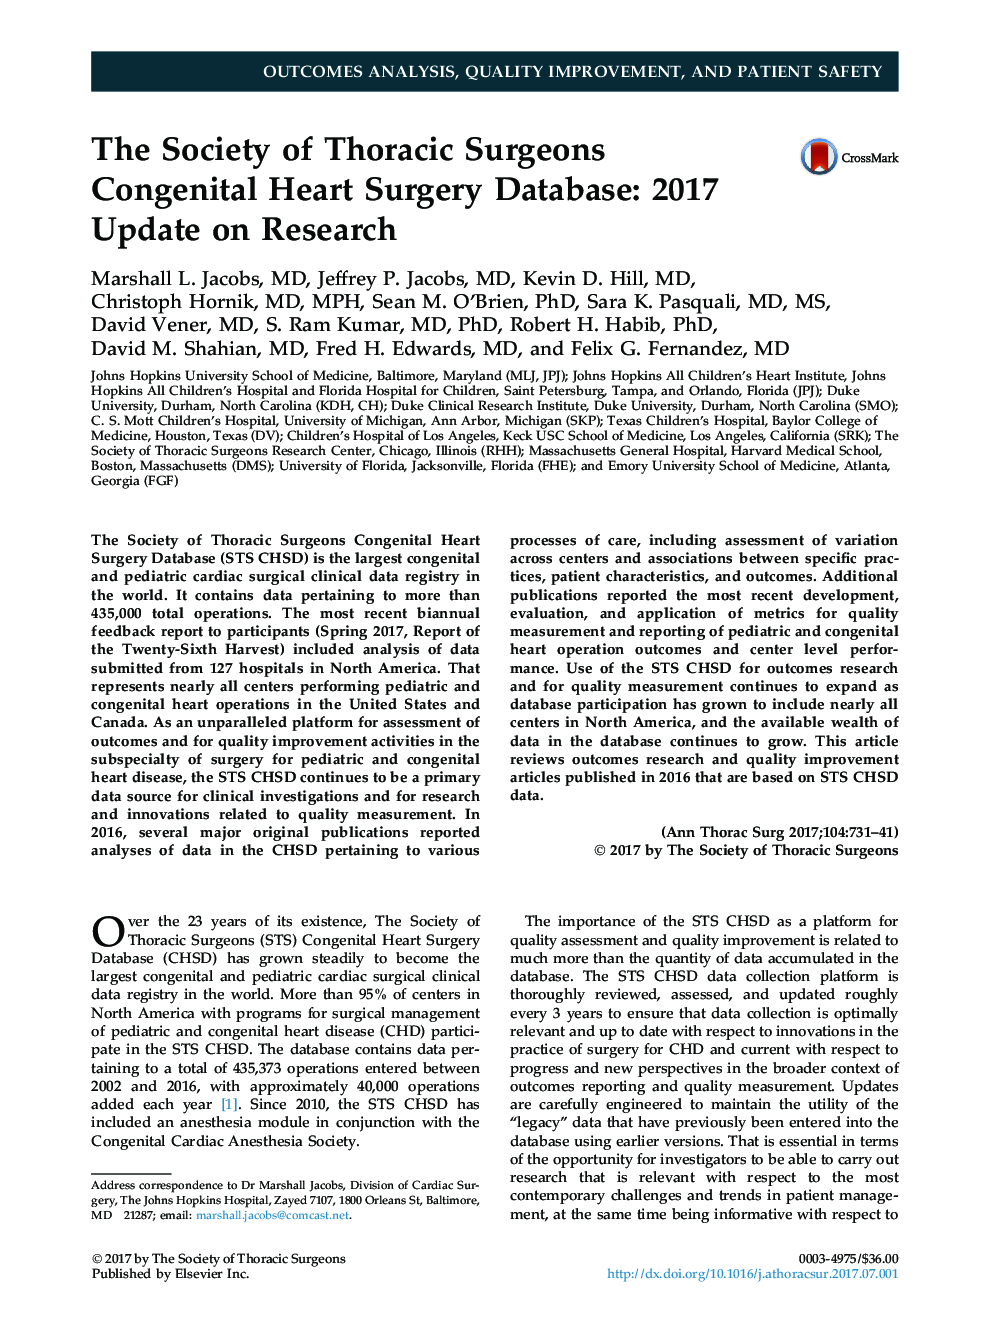 The Society of Thoracic Surgeons CongenitalÂ Heart Surgery Database: 2017 Update on Research